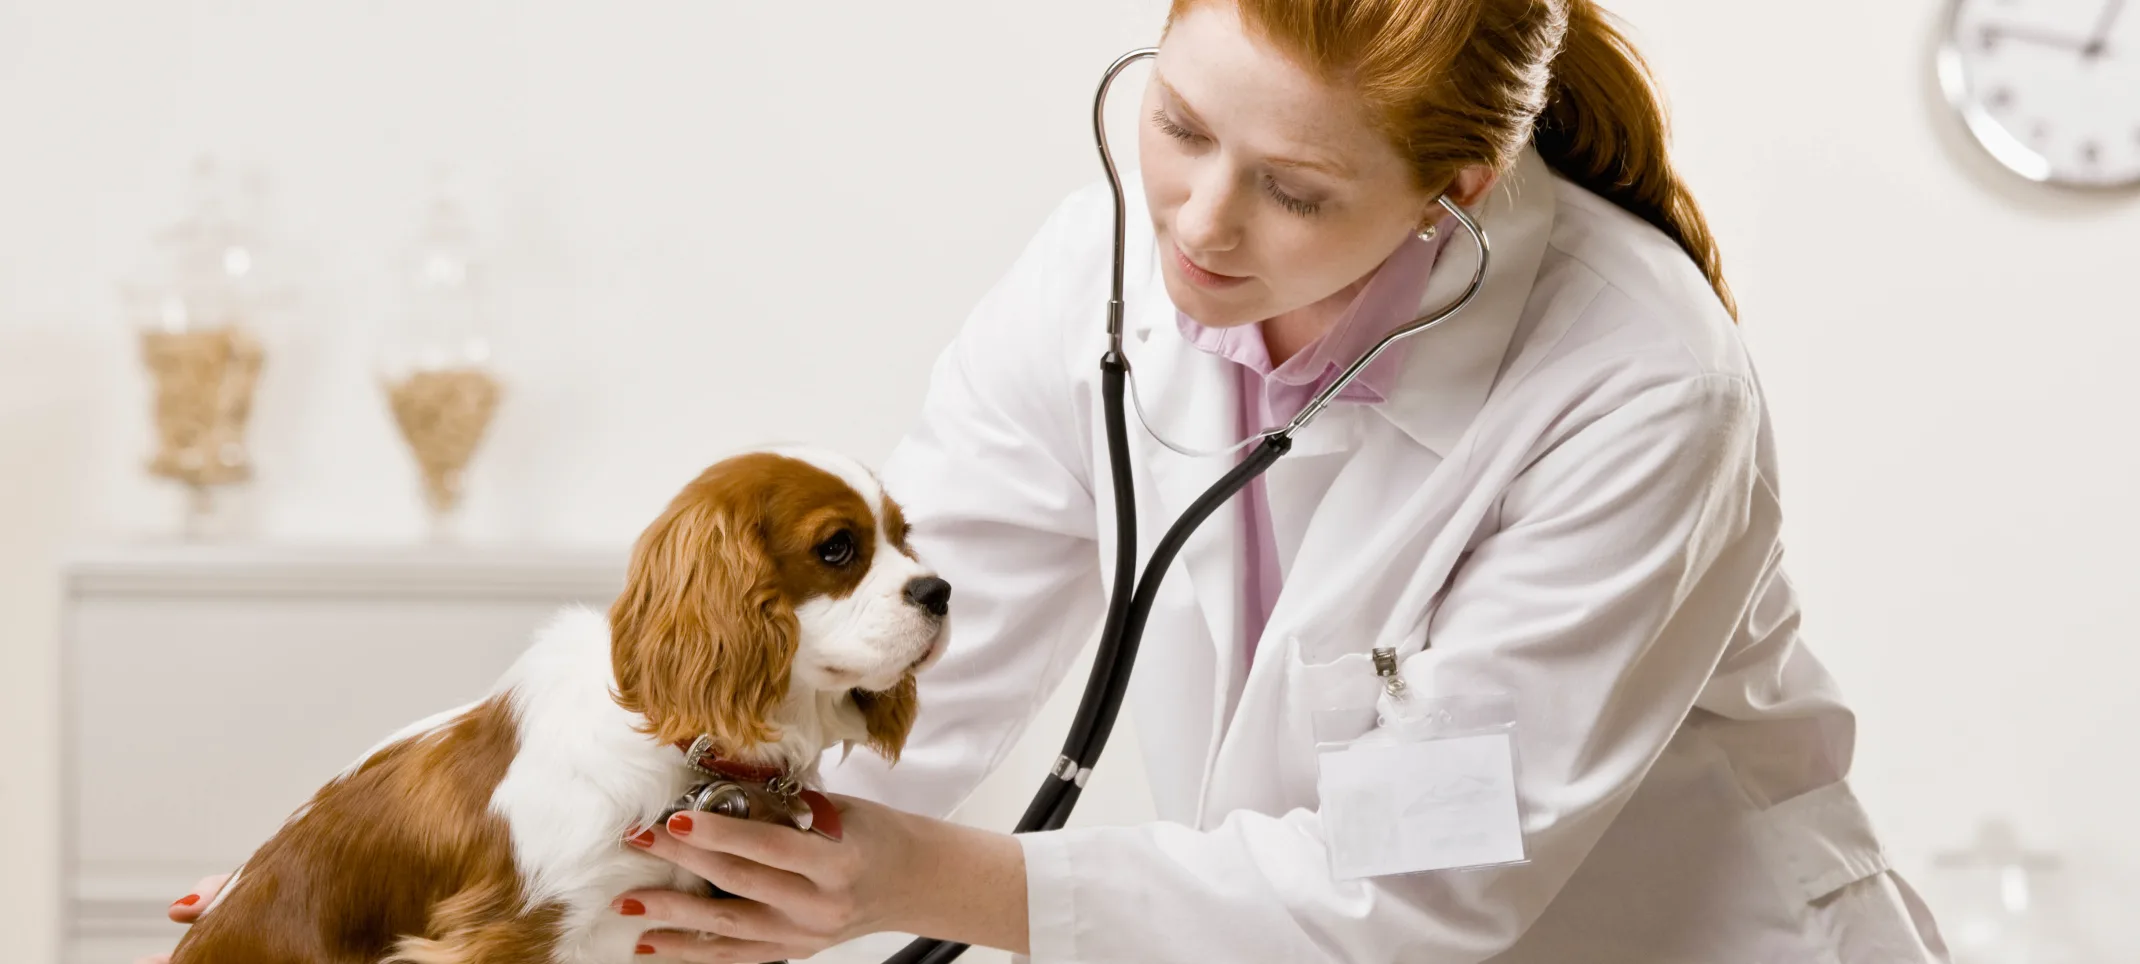 Doctor using a stethoscope on dog